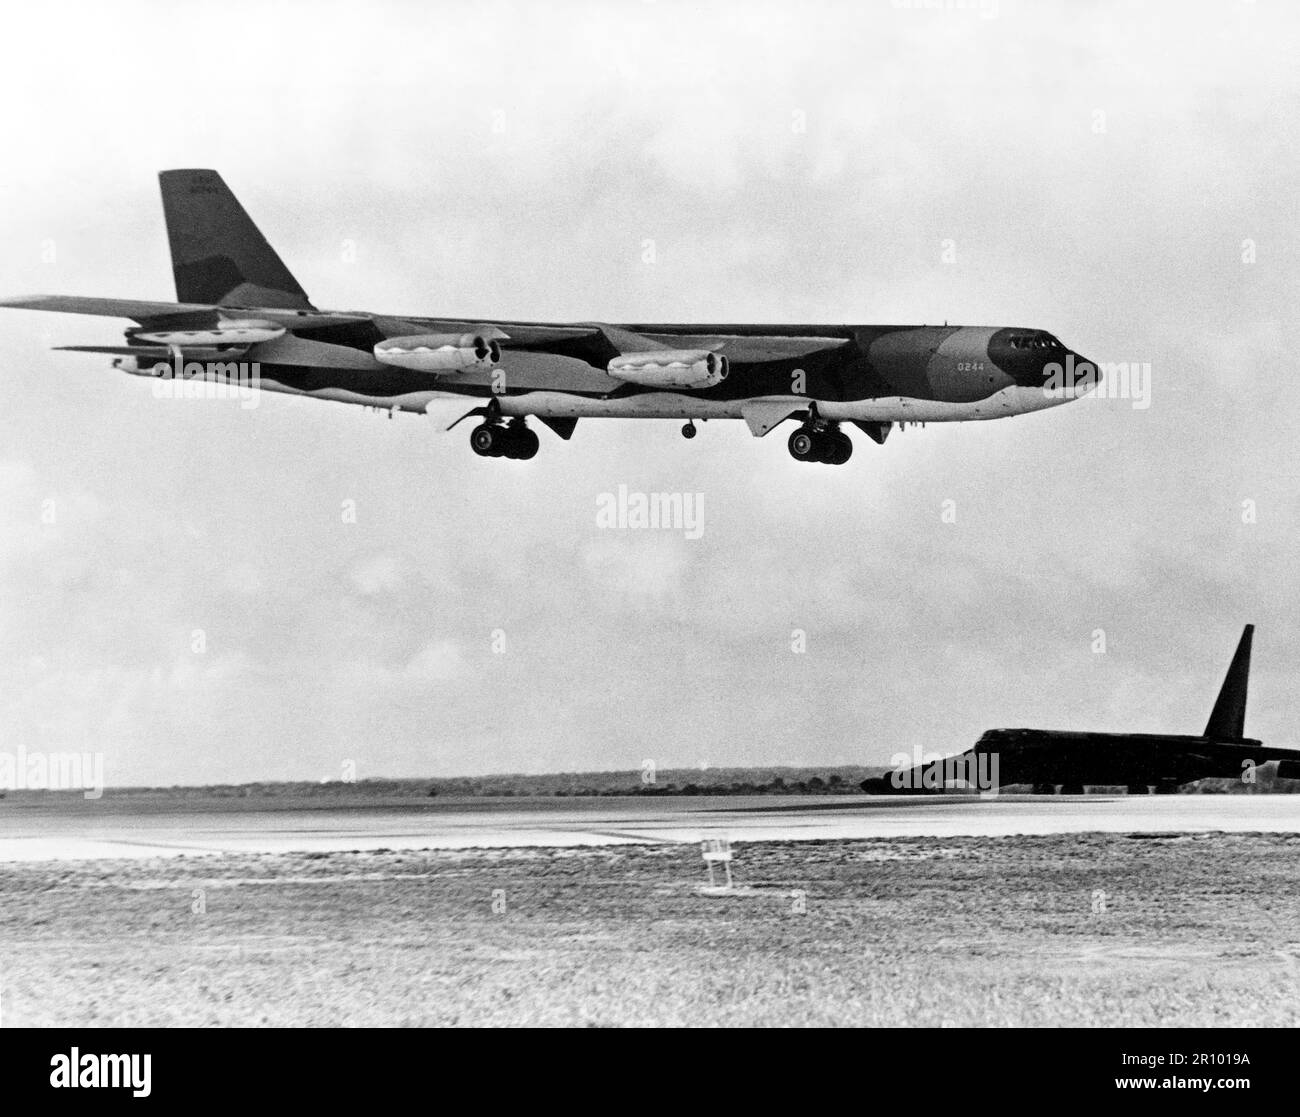 A B-52D Stratofortress aircraft waits beside the runway as a B-52G approaches for landing after completing a bombing mission over North Vietnam during Operation LINEBACKER.  The aircraft are from the Strategic Air Command. Stock Photo